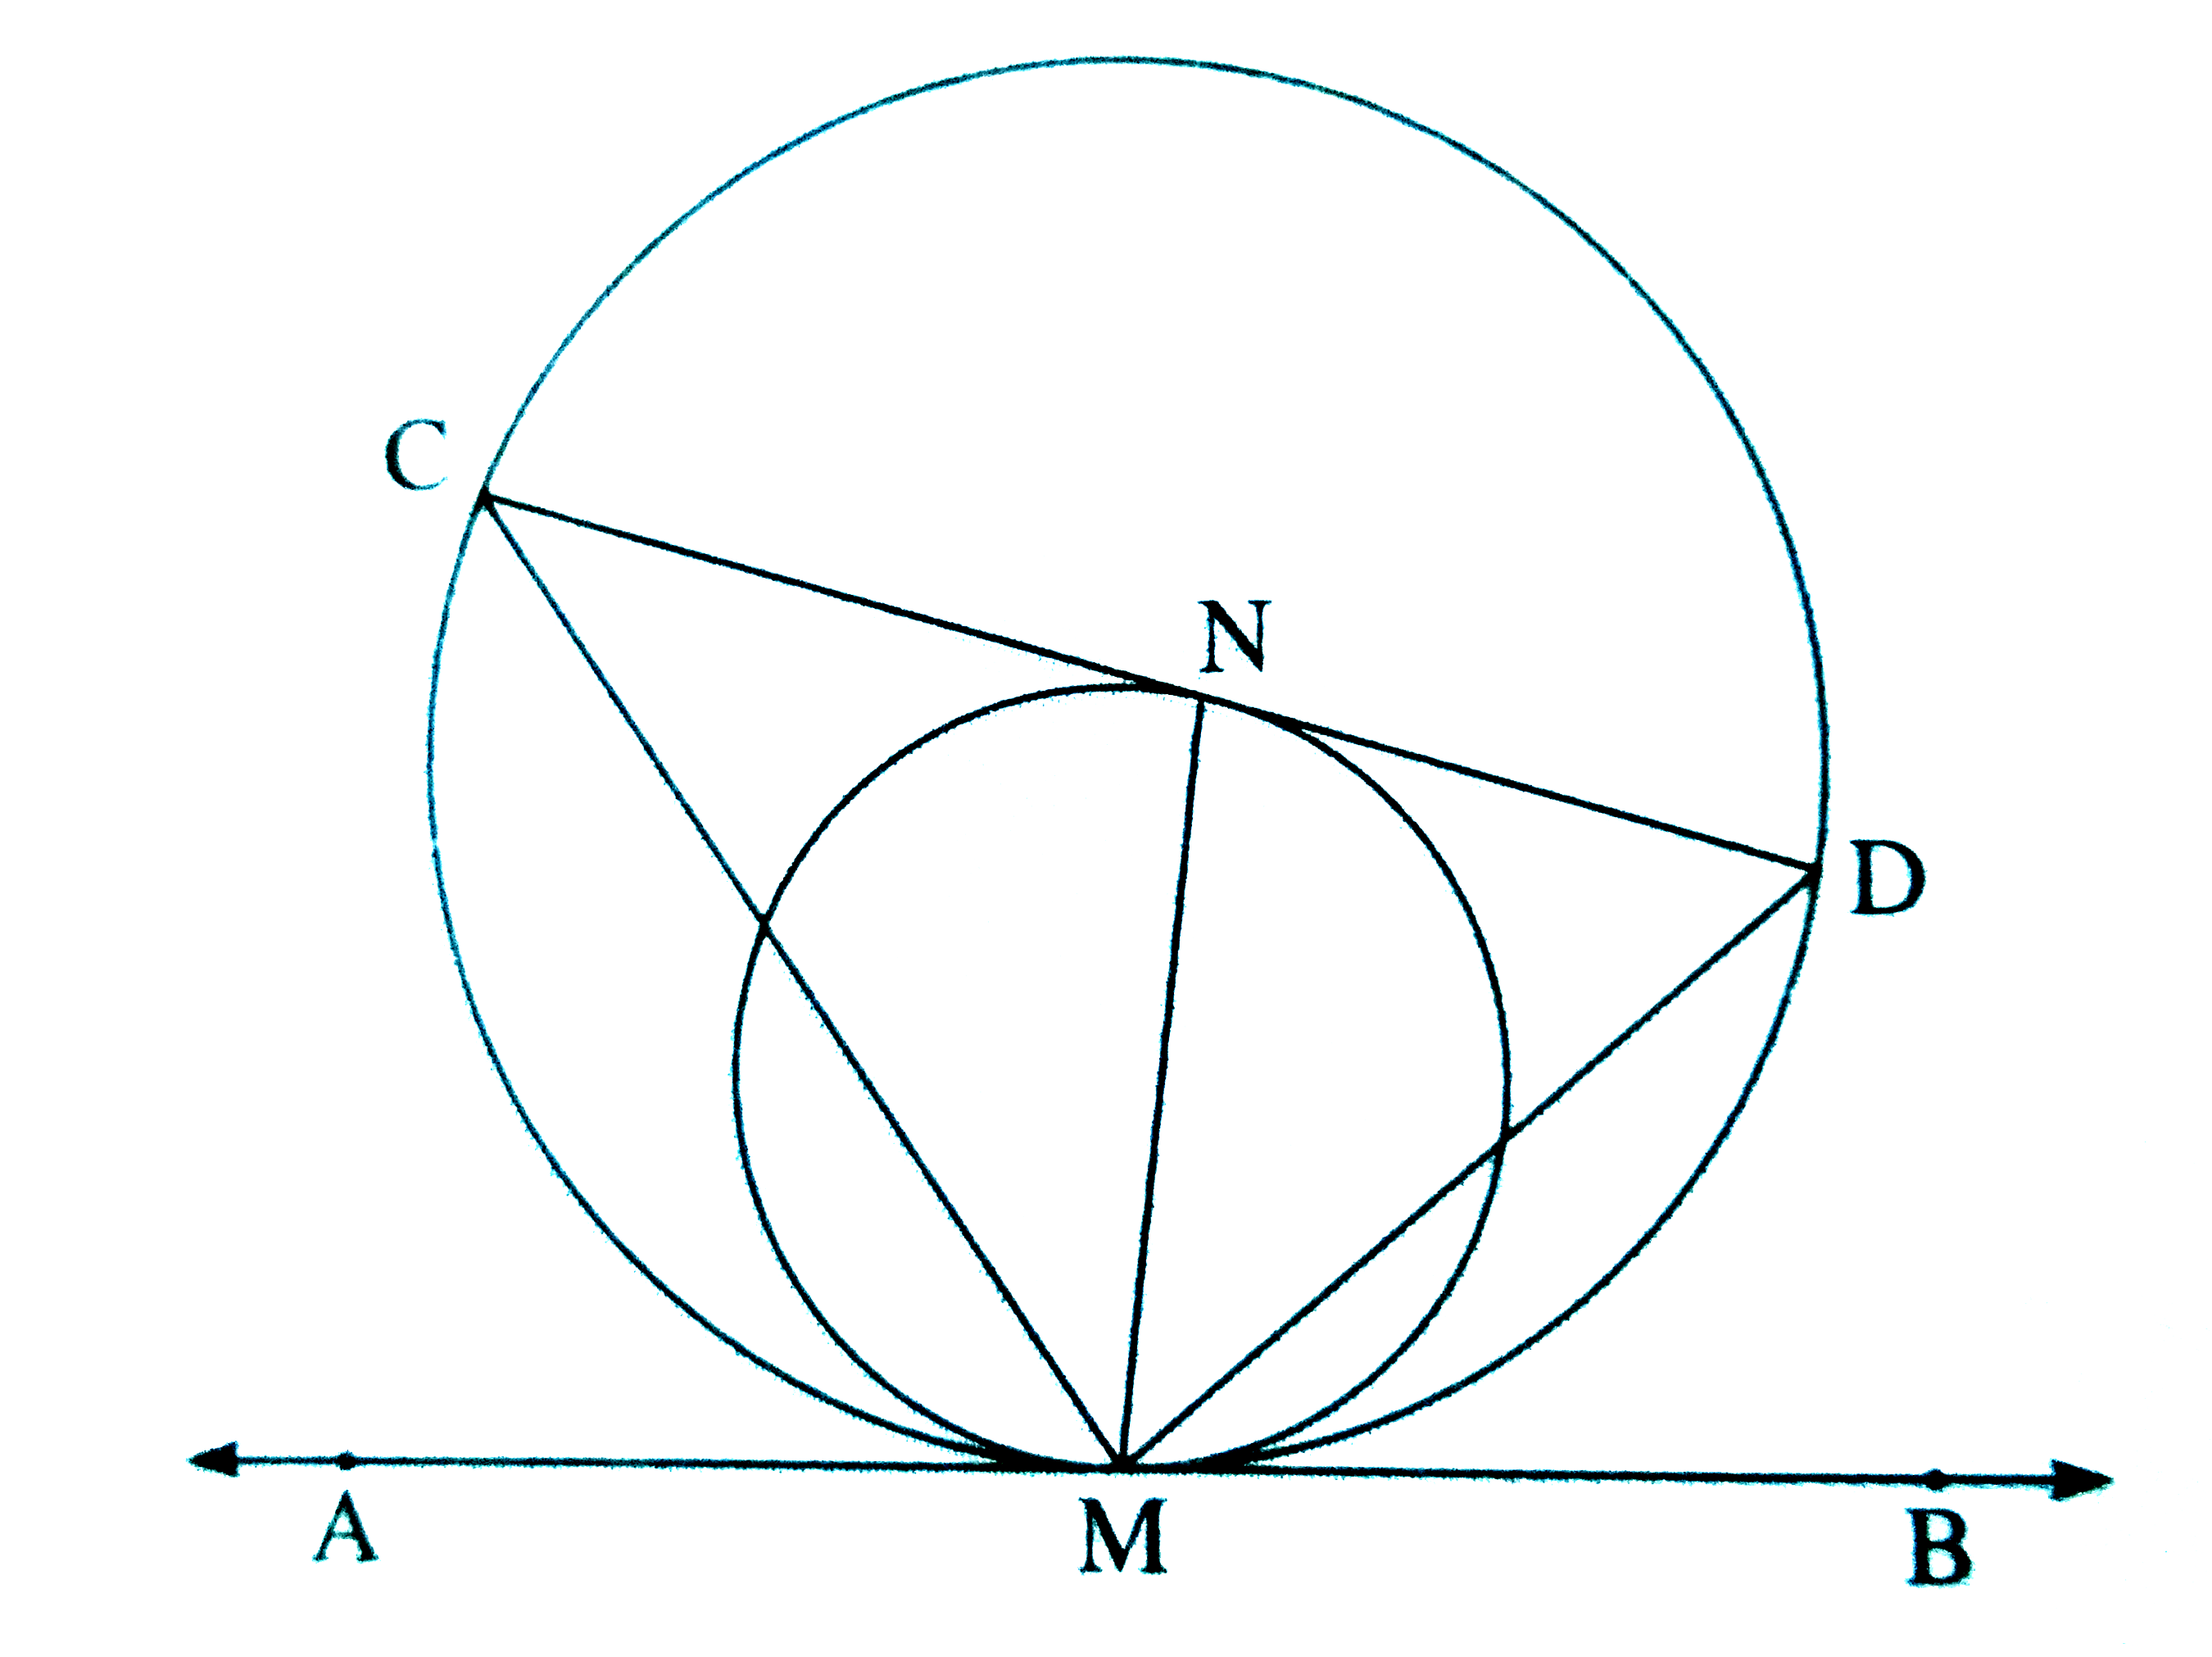 In  the figure, M is the point of contact of two internally touching circles. The chord CD of the bigger circle touches the smaller circle at point N. Line AMB is  their common tangent. Prove MN bisects /CMD